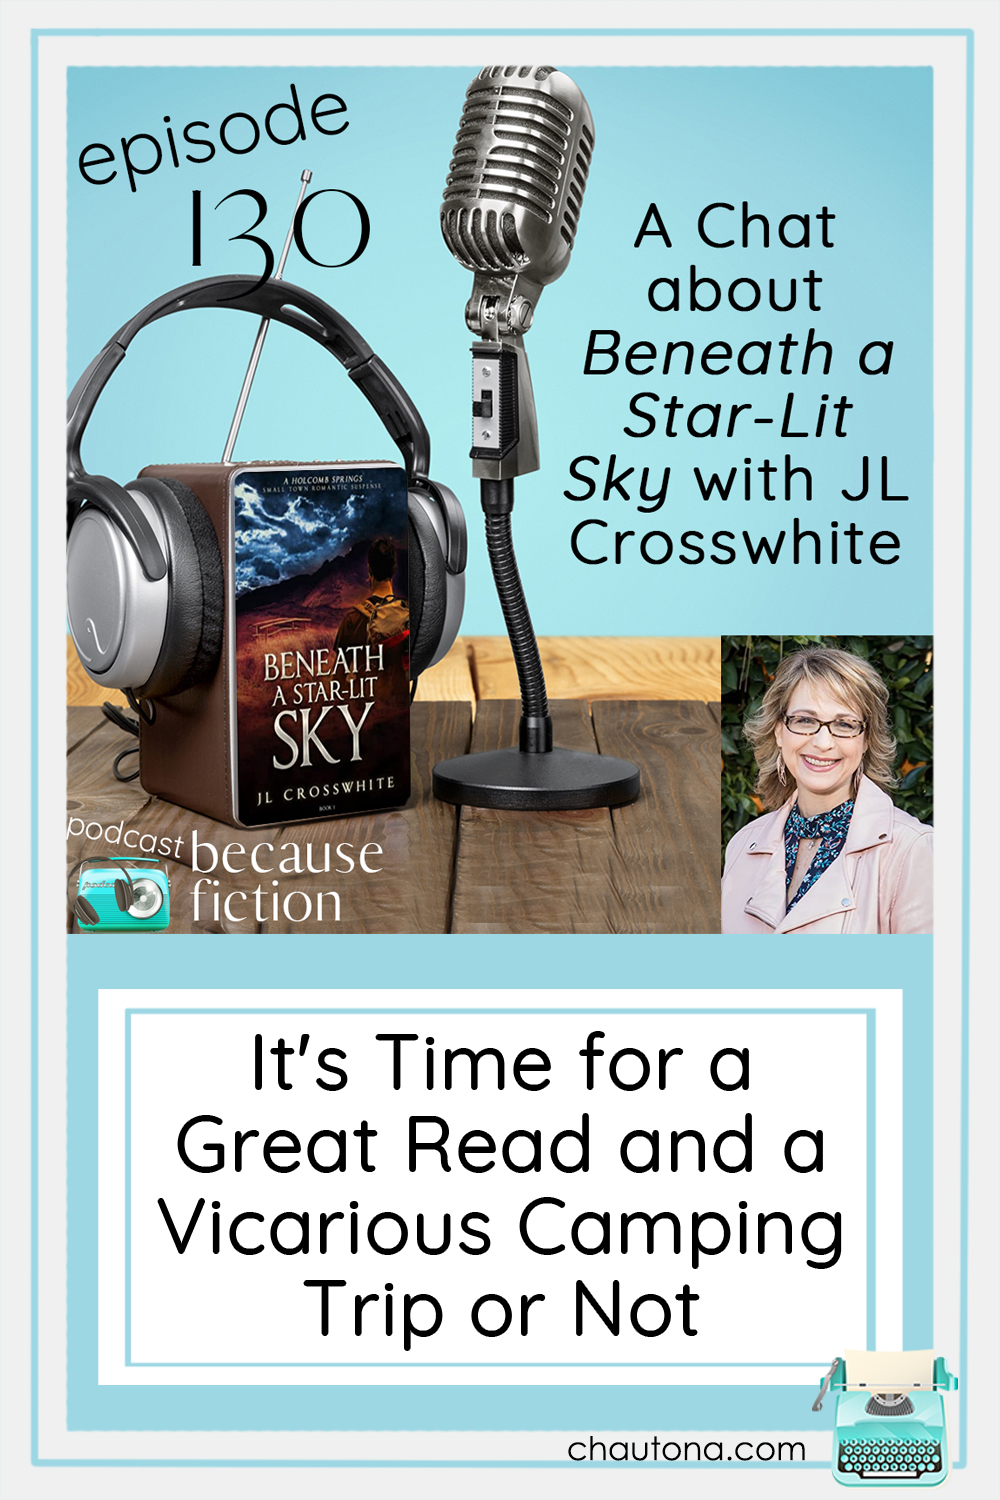 Looking for a great read this weekend? I'm going to recommend Beneath a Star-Lit Sky by JL Crosswhite. You won't want to miss this! via @chautonahavig